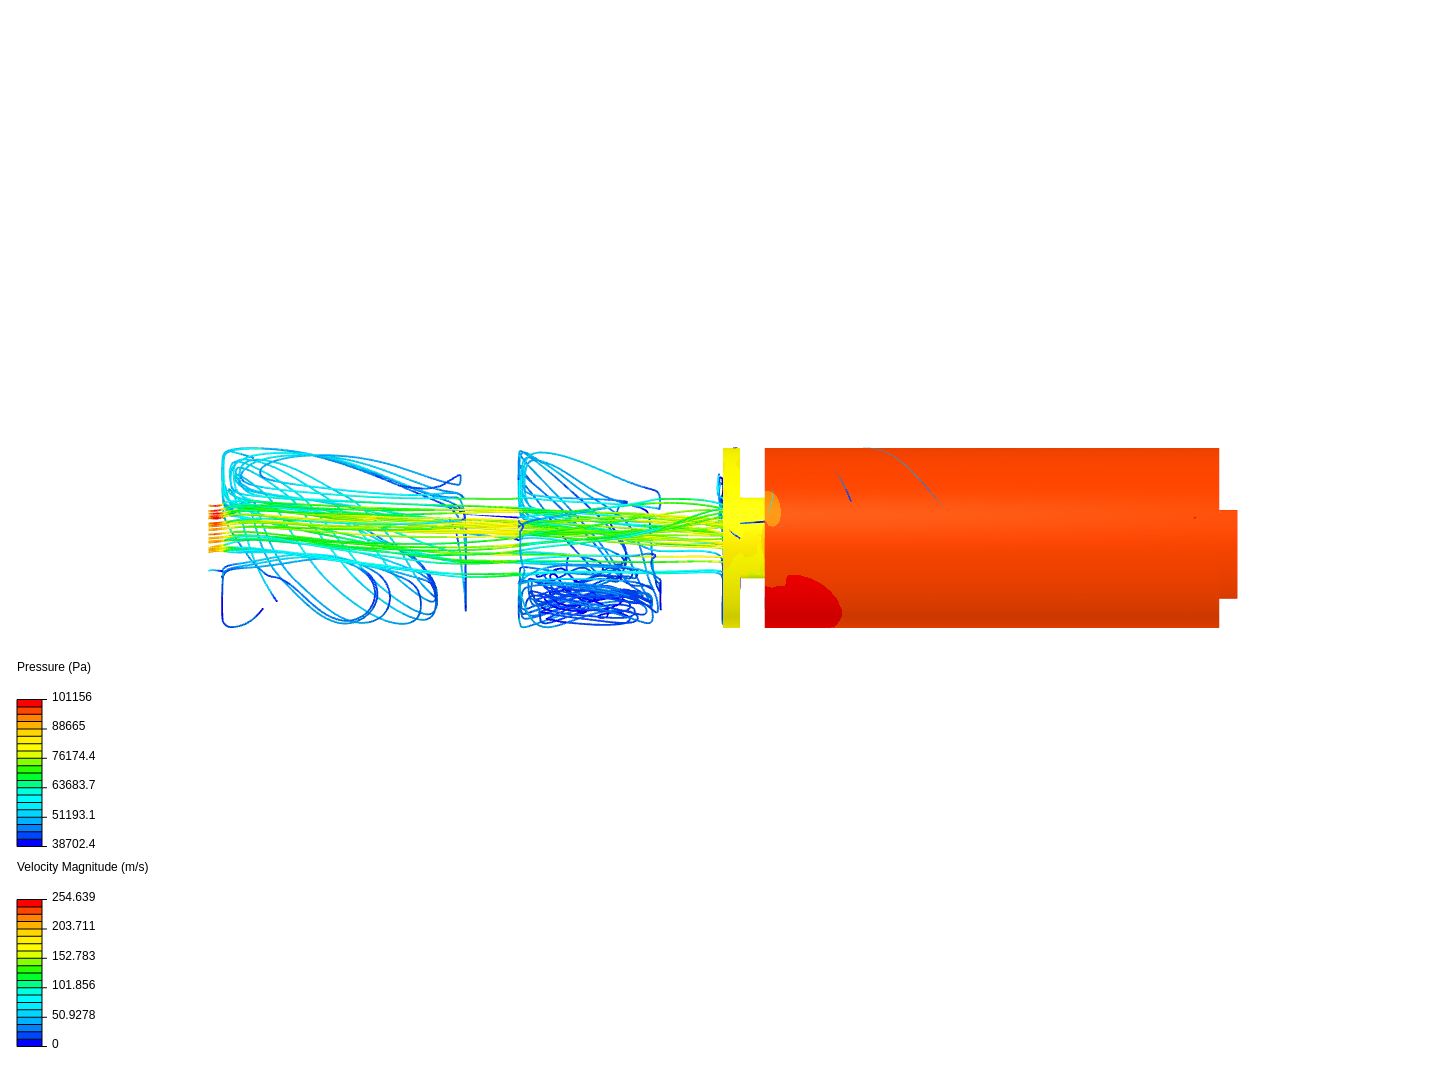 Long omplex tube compressible air flow image